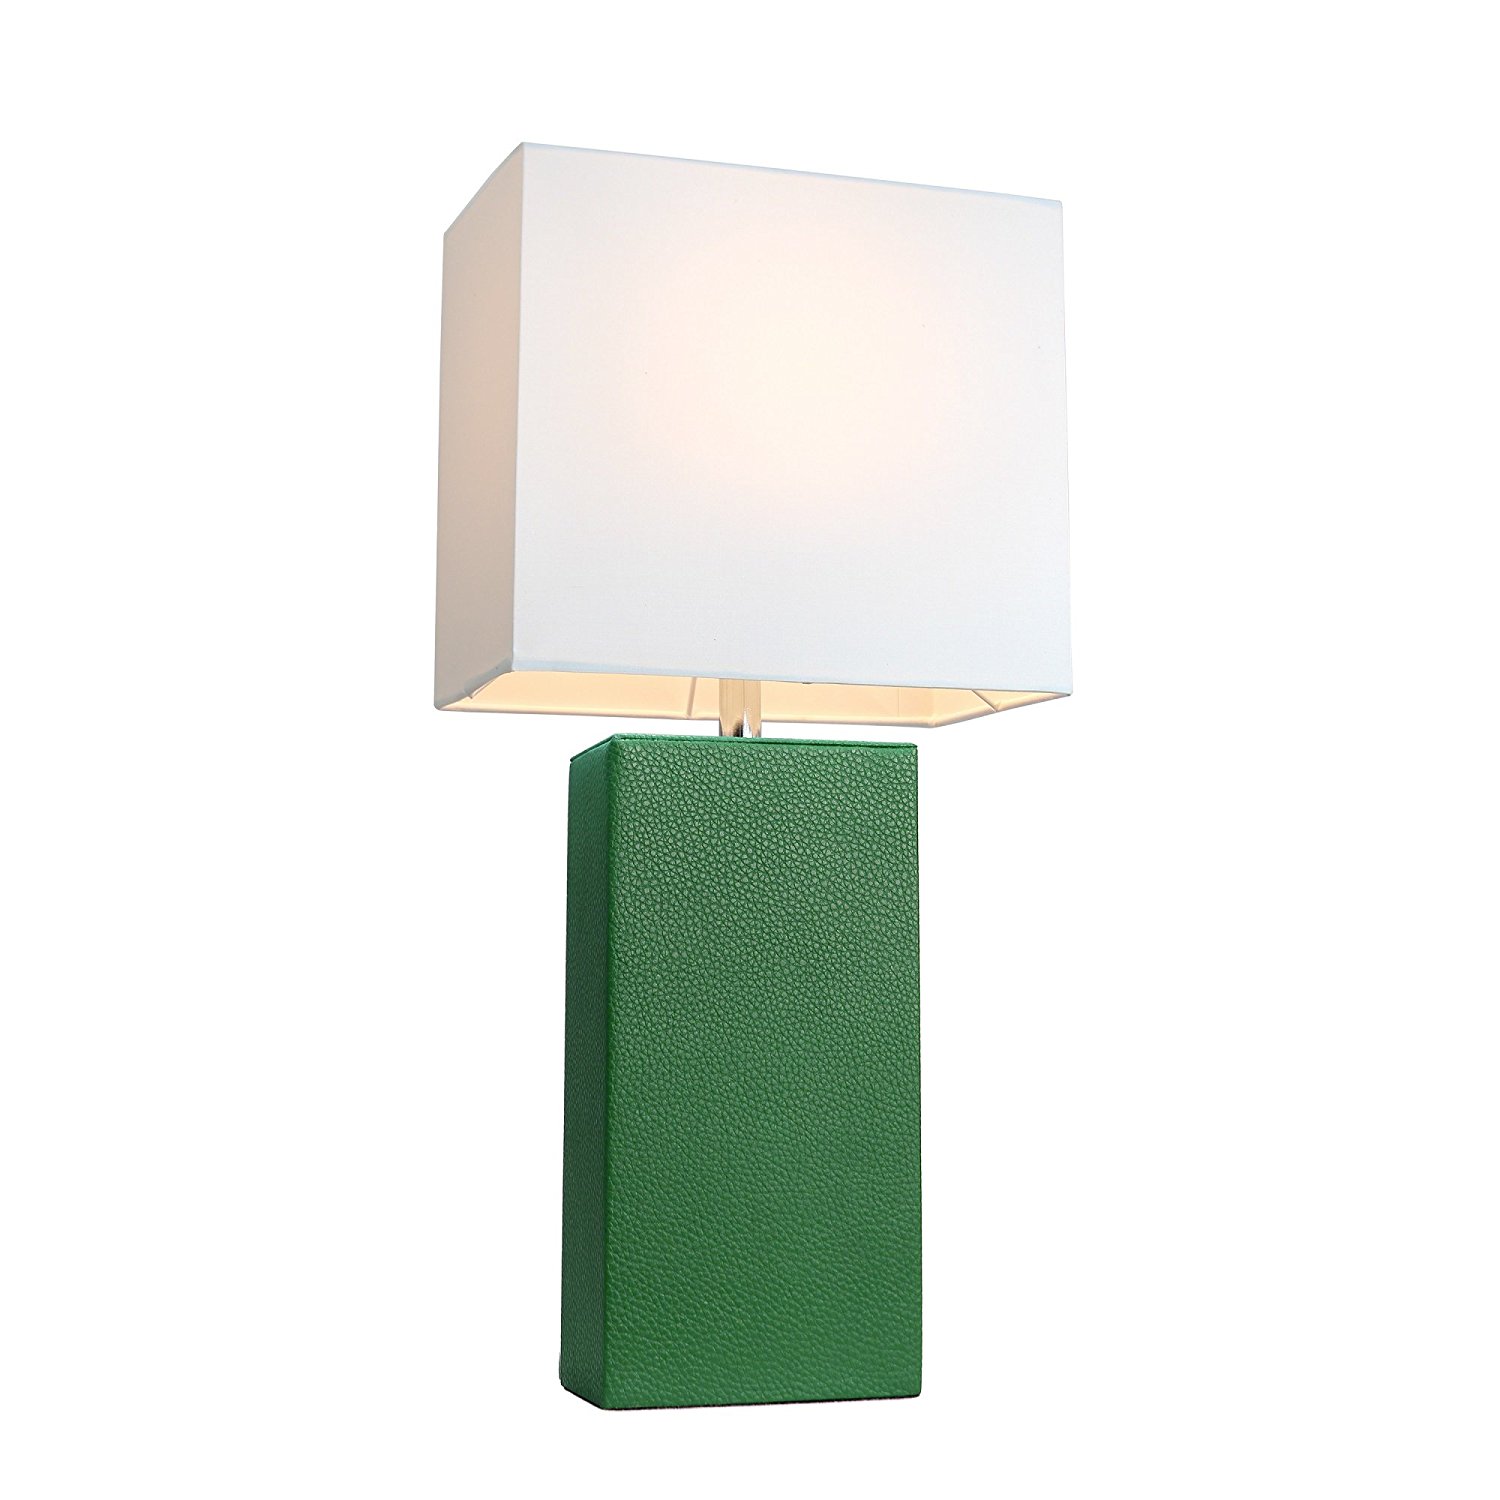 Modern Green Colored Table Lamp Design photo - 10